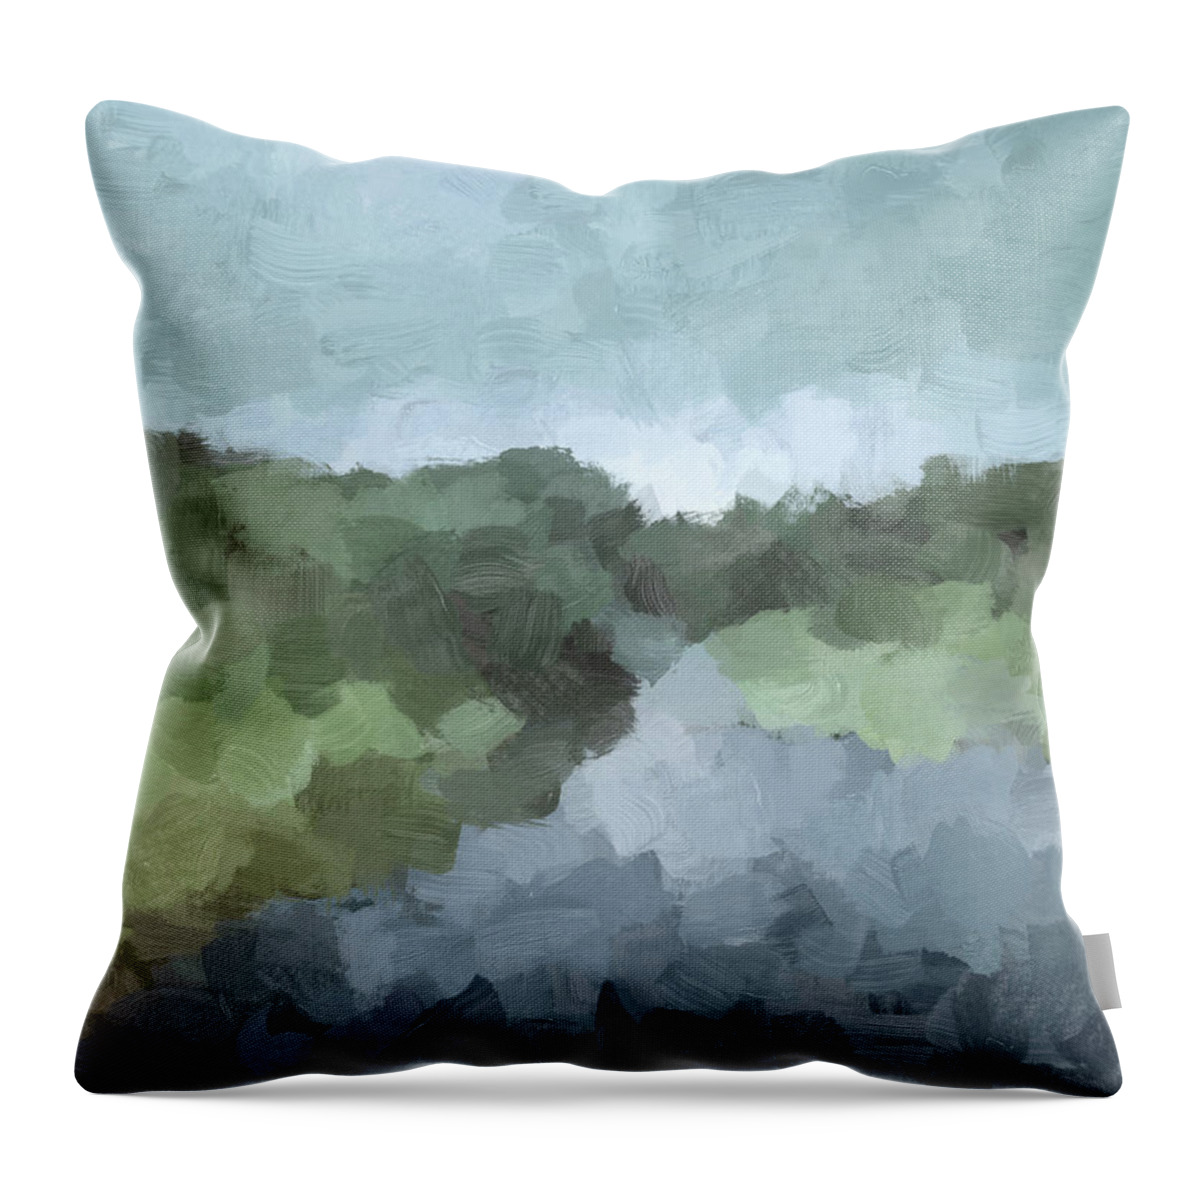 Seafoam Throw Pillow featuring the painting Trail at Dusk by Rachel Elise